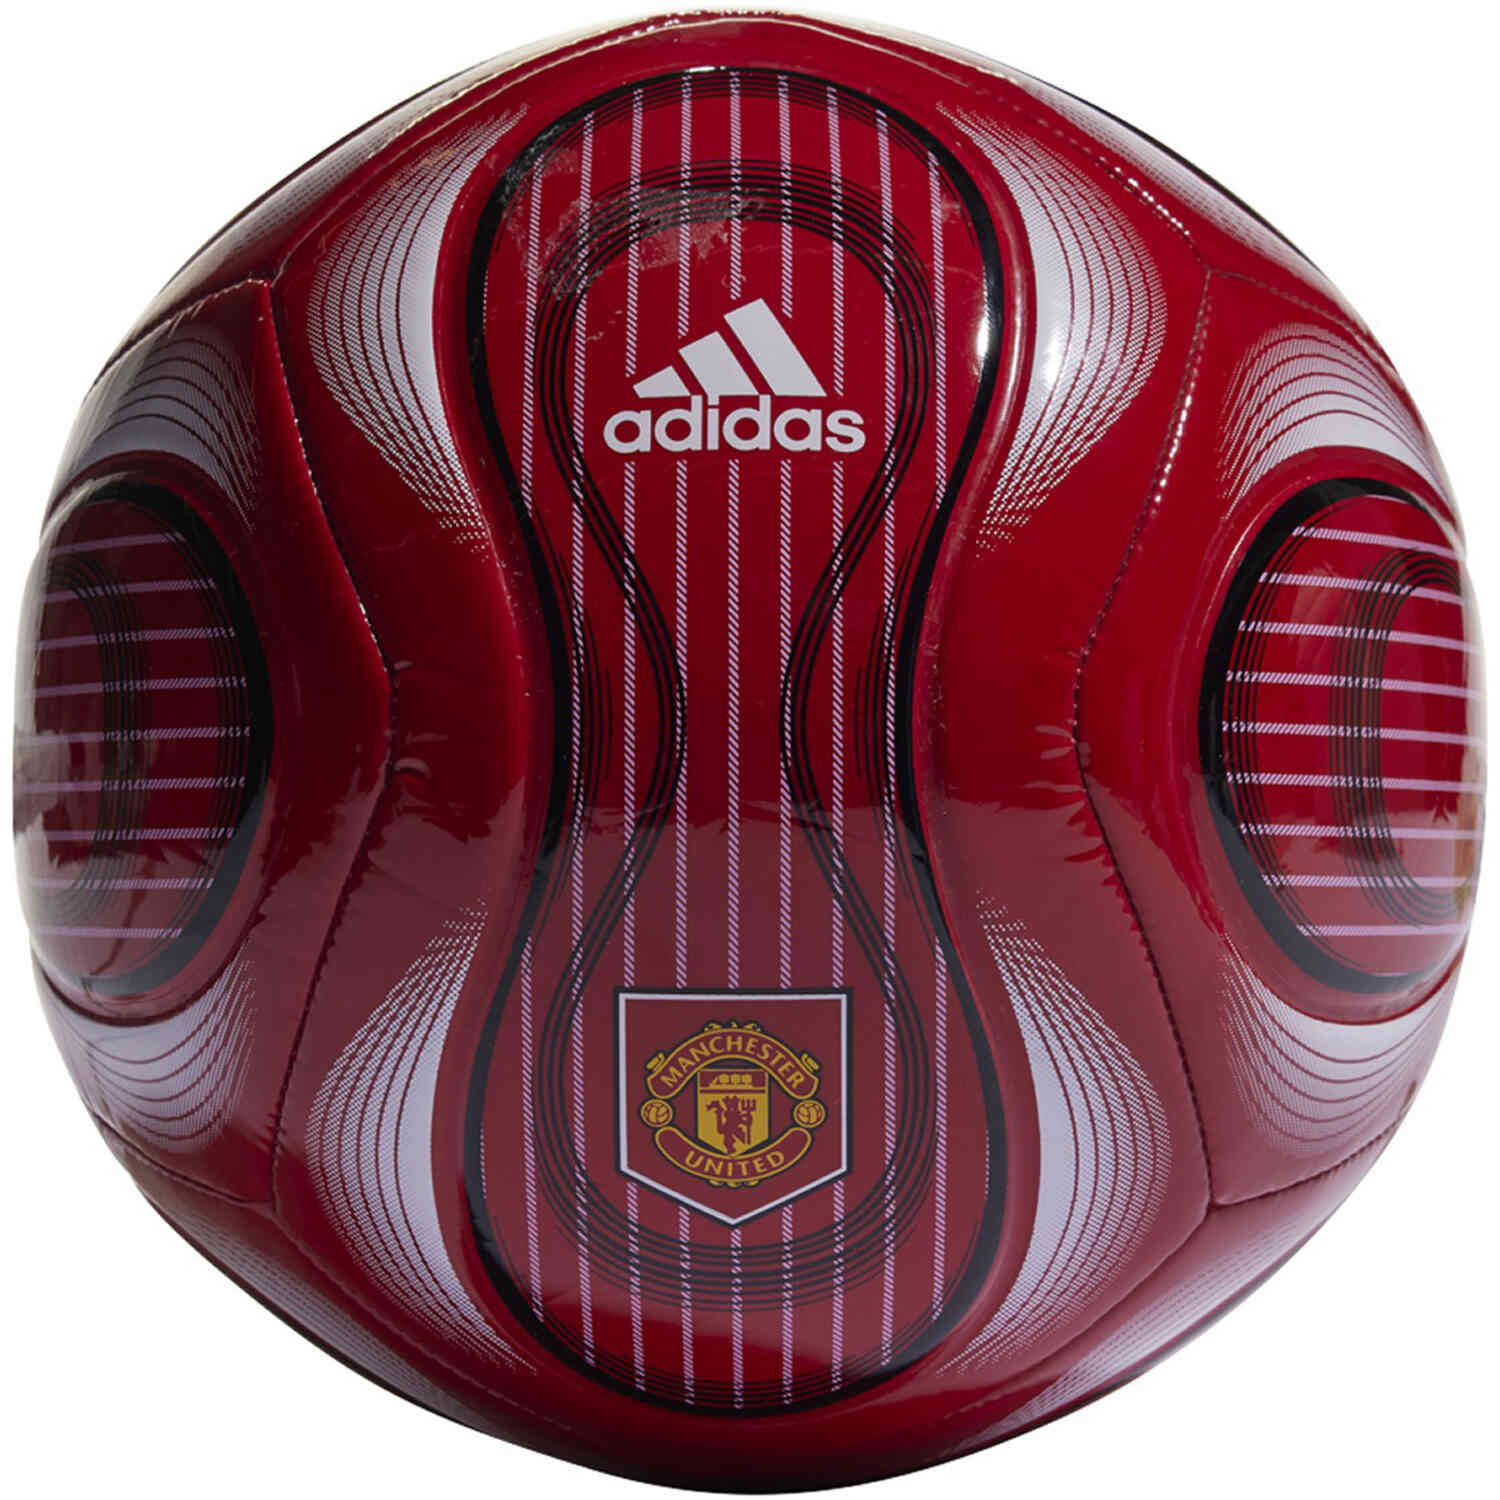 adidas Manchester United Teamgeist Club Ball - Real Red & Black White - SoccerPro